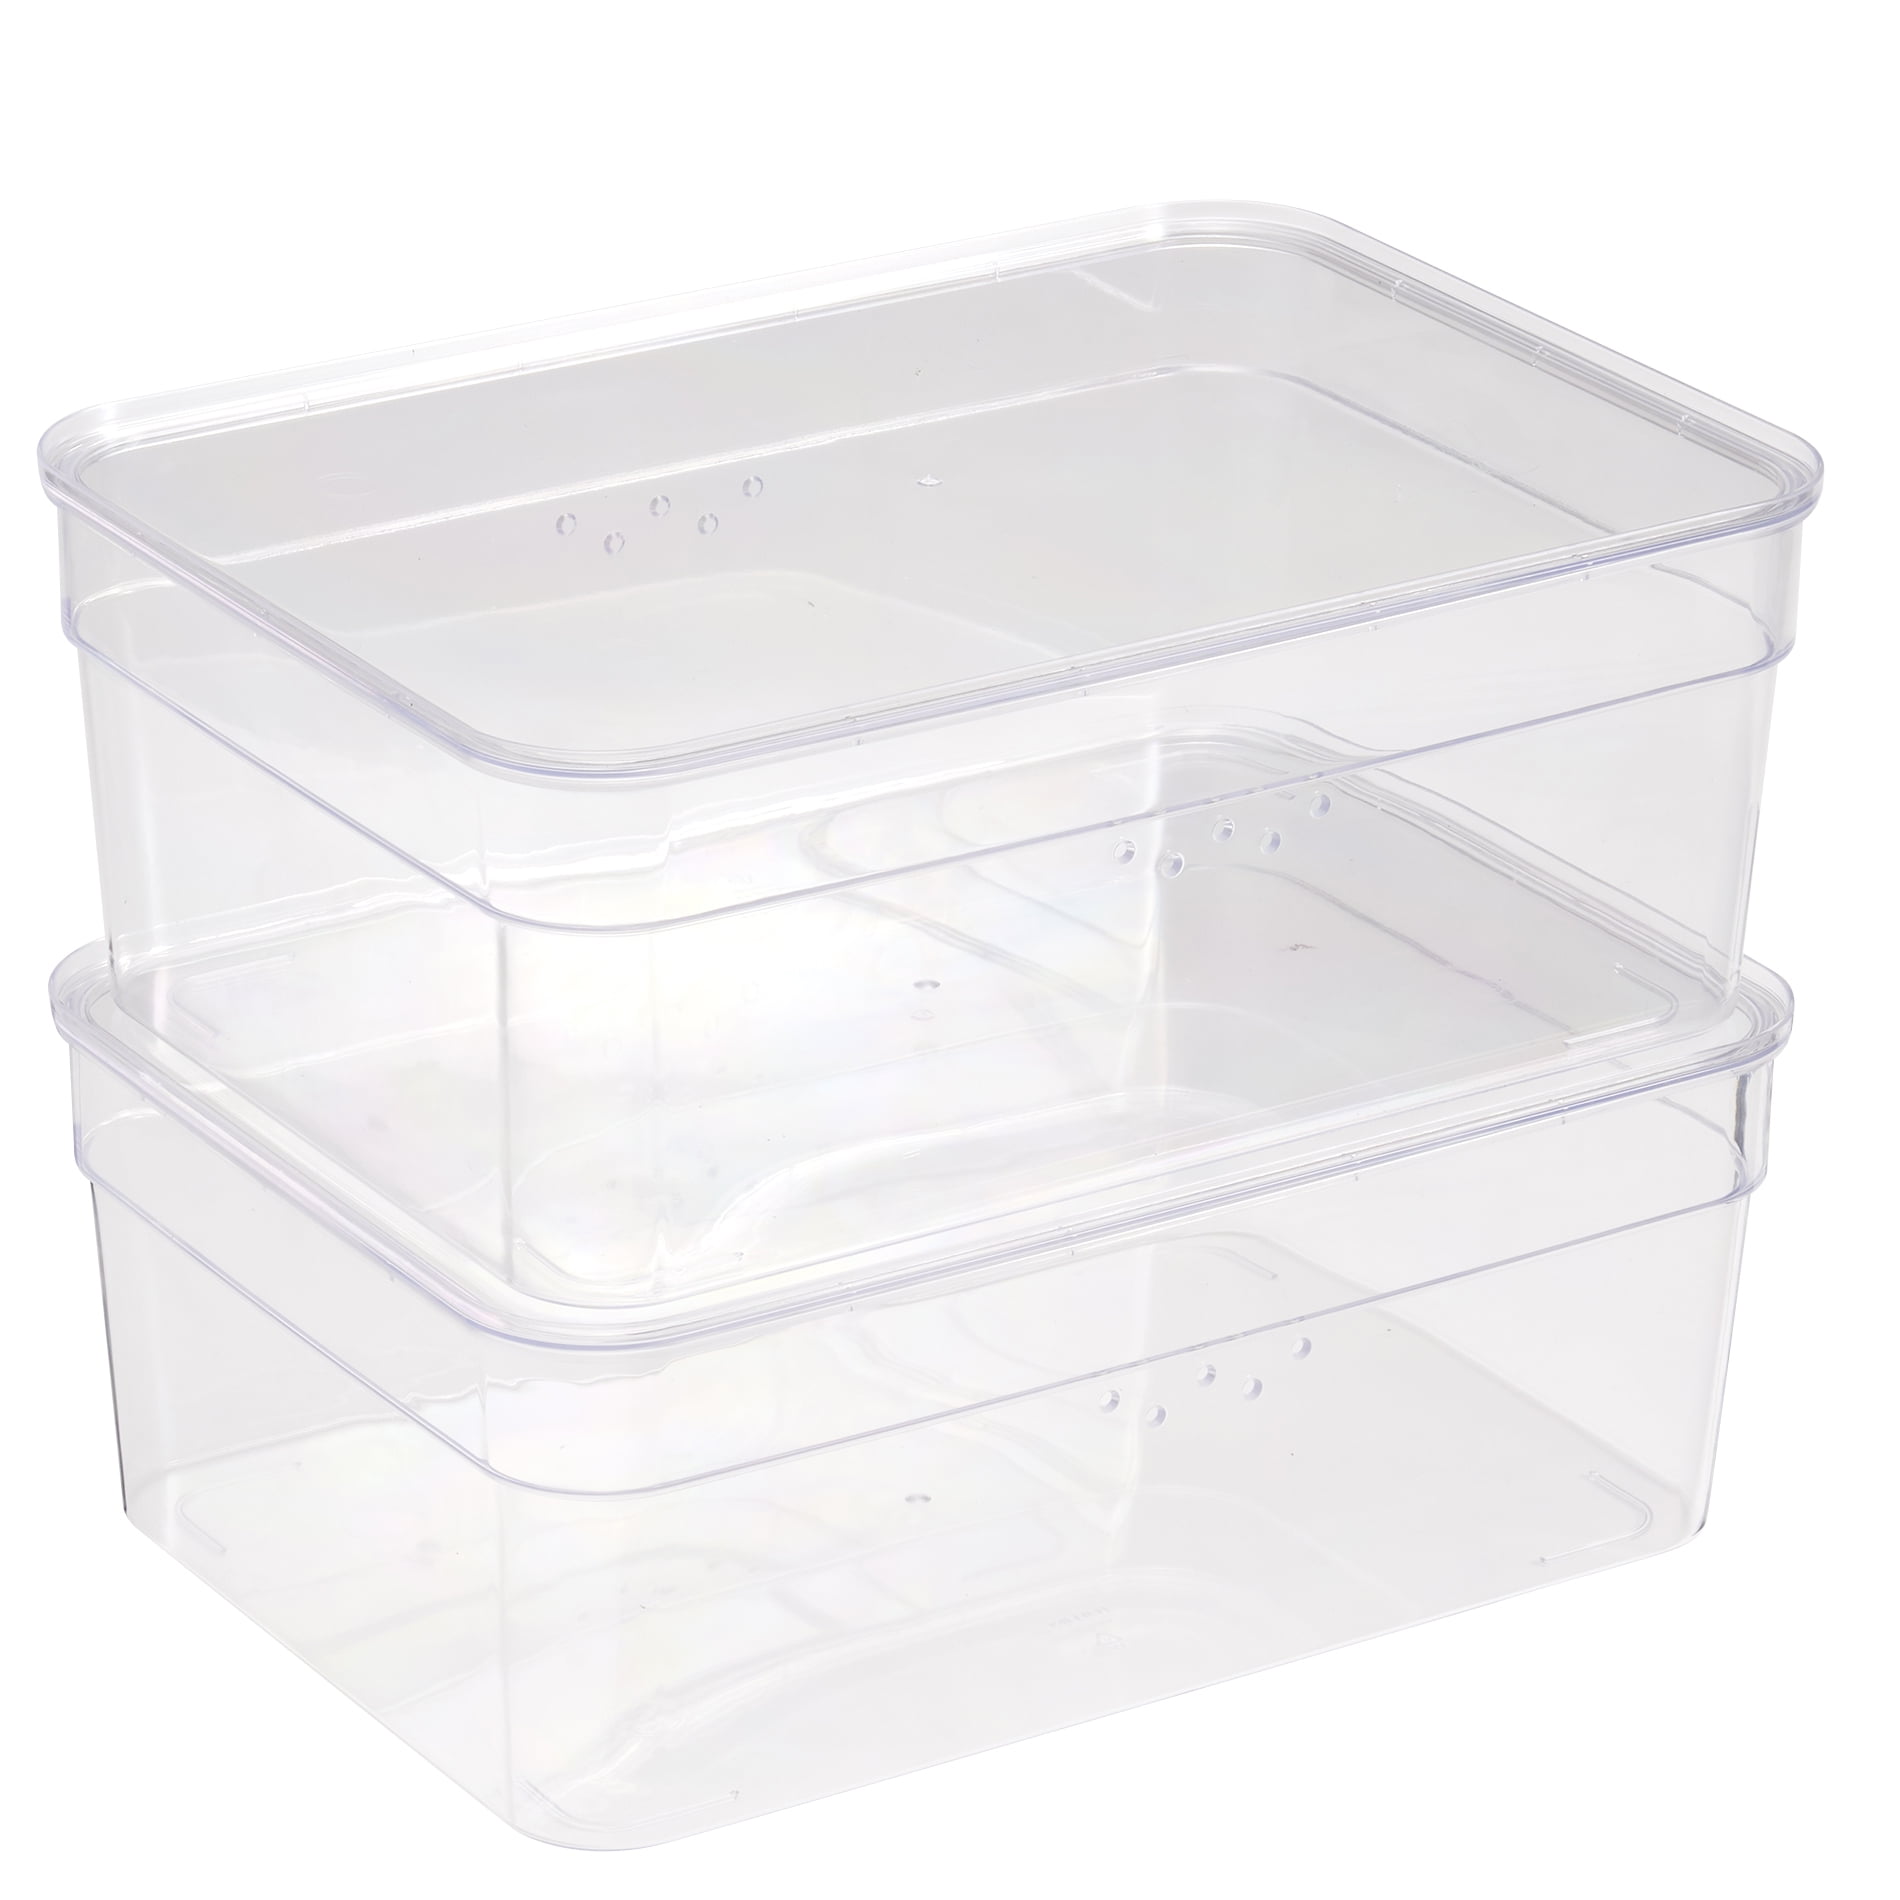 Mainstays Clear Plastic Glossy Finish Extra Wide Shoe Box with Lid , Adult Size